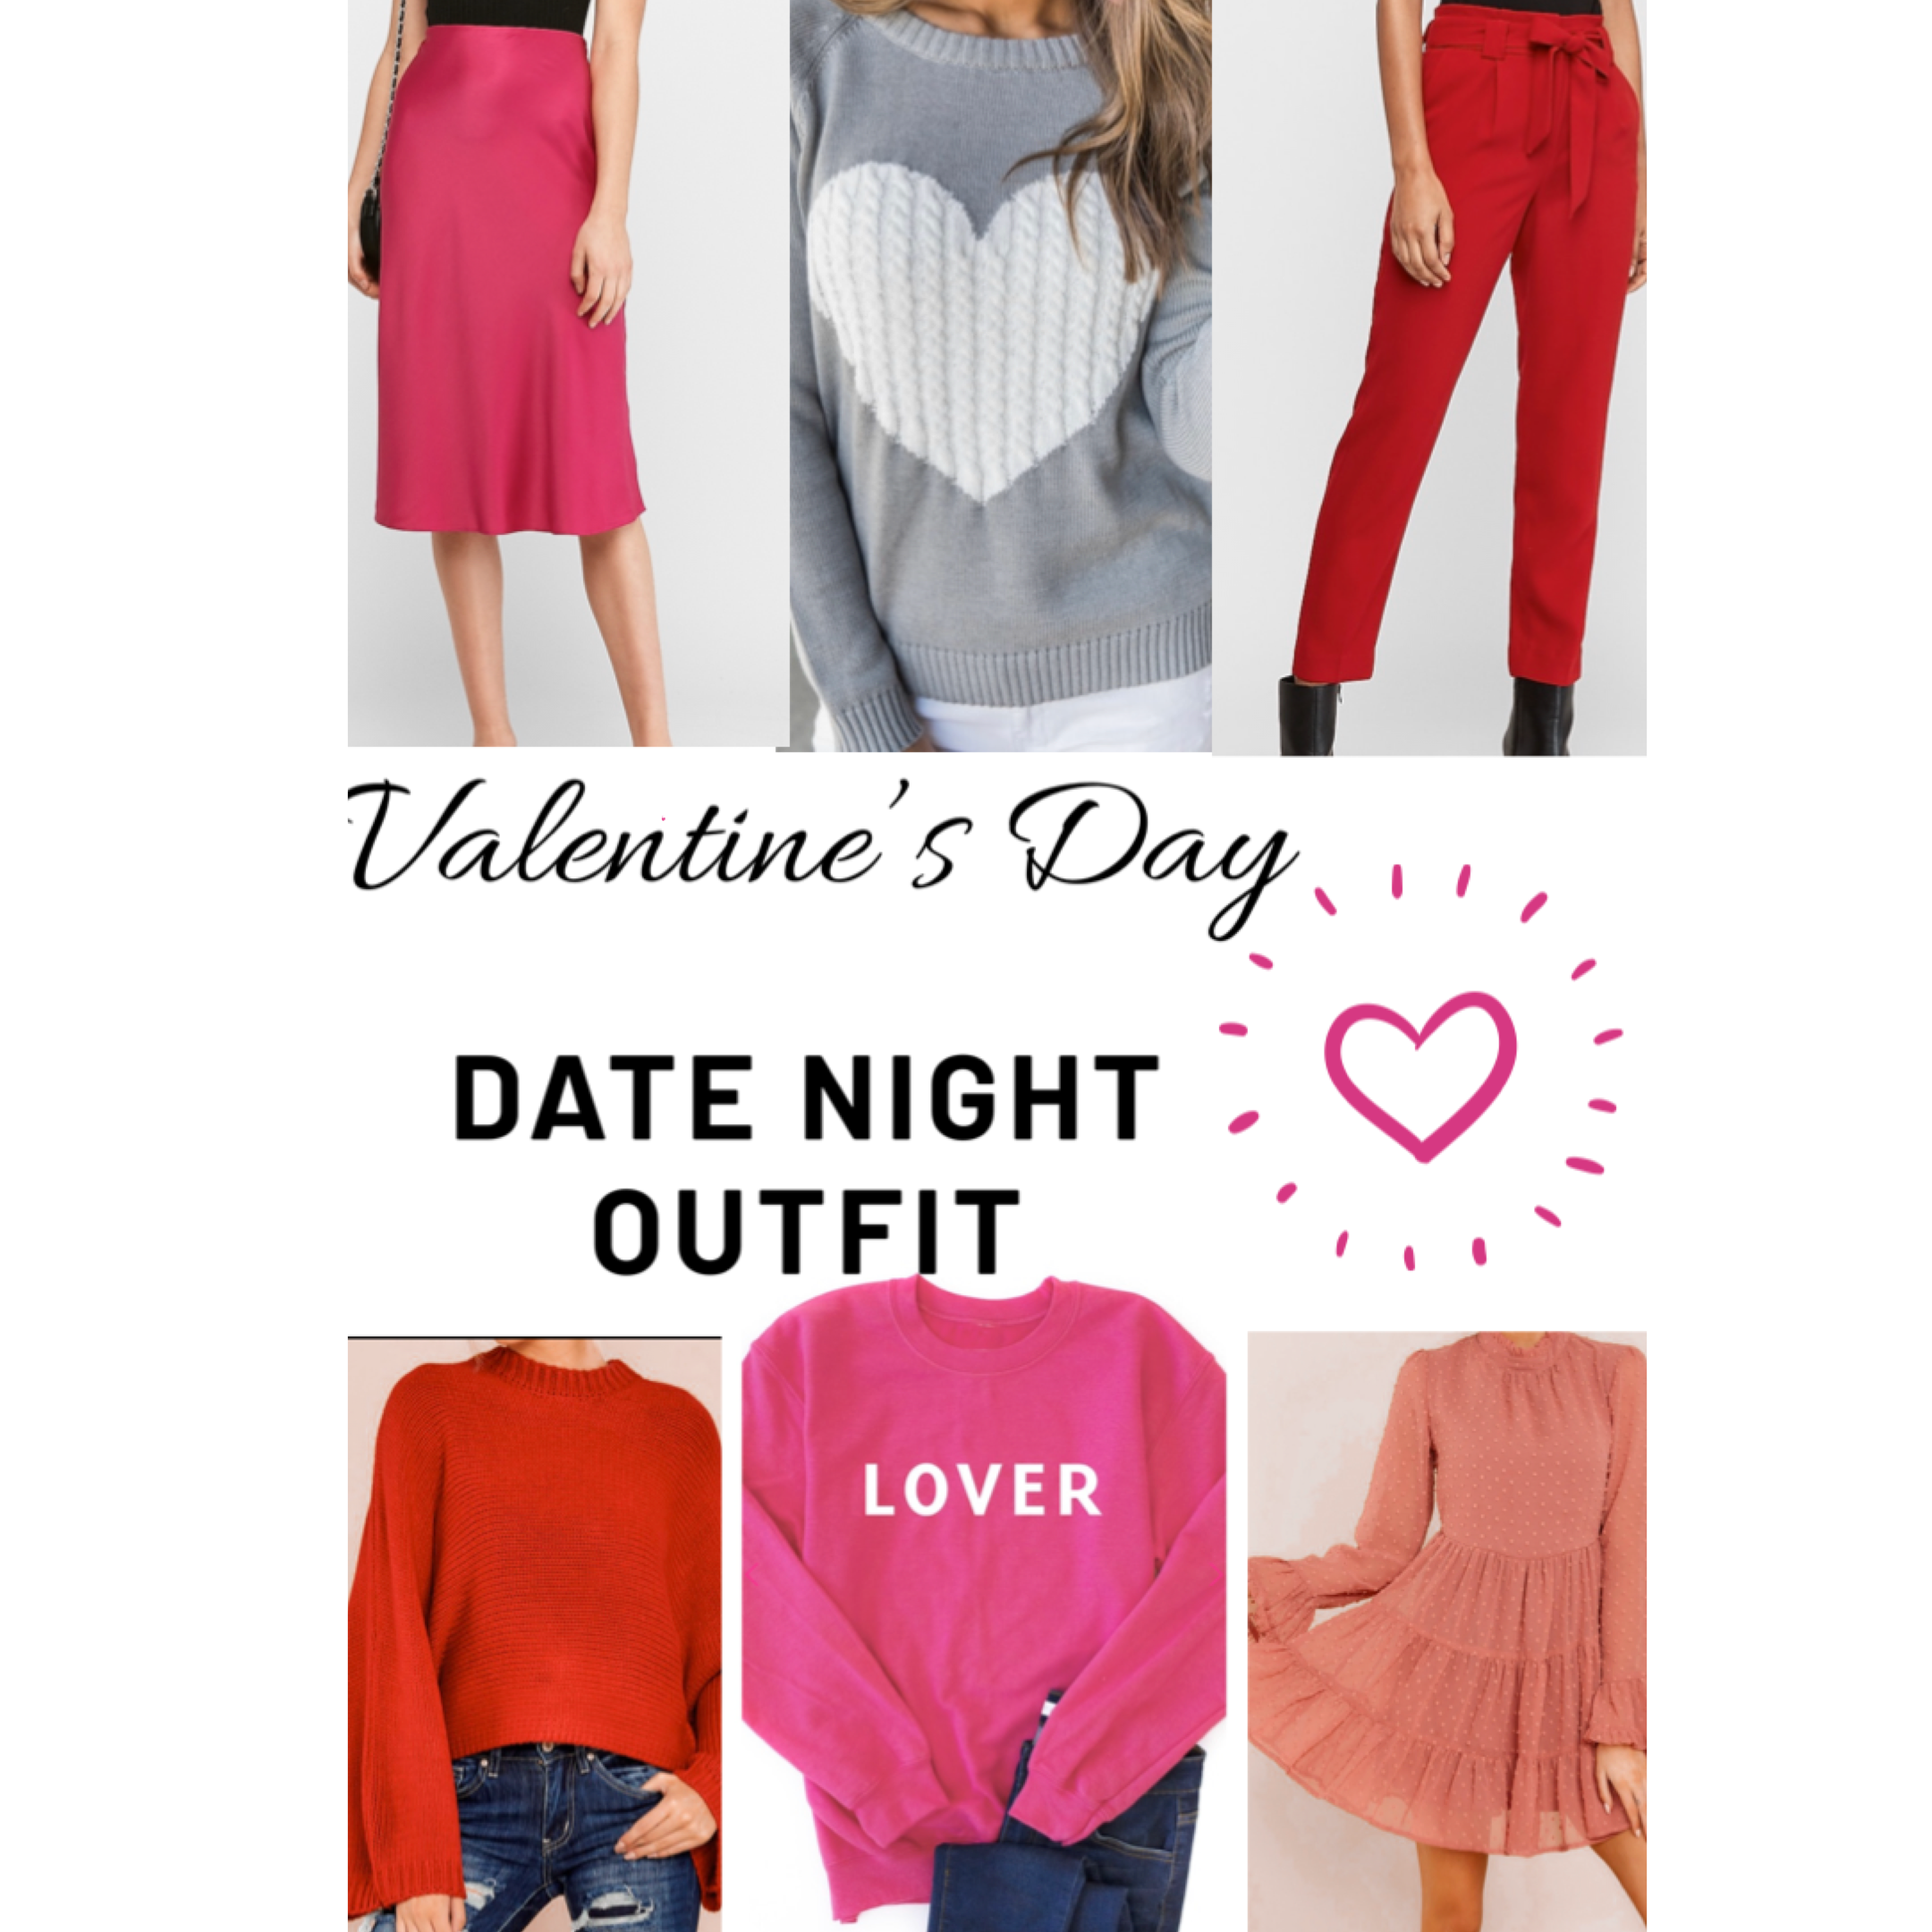 Valentine's Day Date Night Outfits - Fearlessly Foster